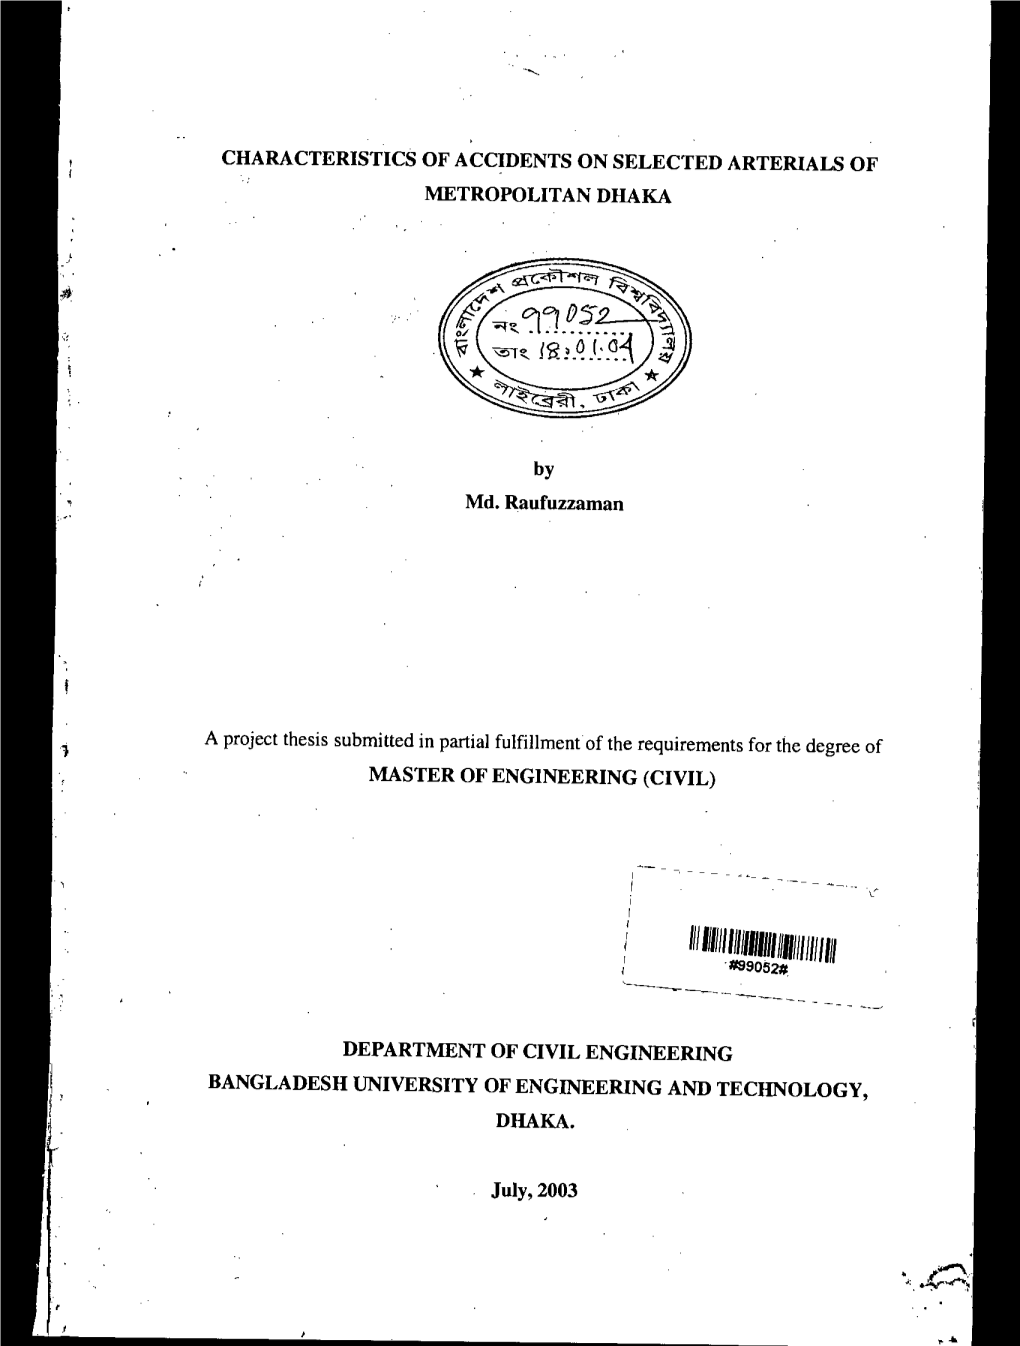 July, 2003 the Thesis Titled Characteristics of Accidents on Selected Arterials of Metropolitan Dhaka Submitted by Md